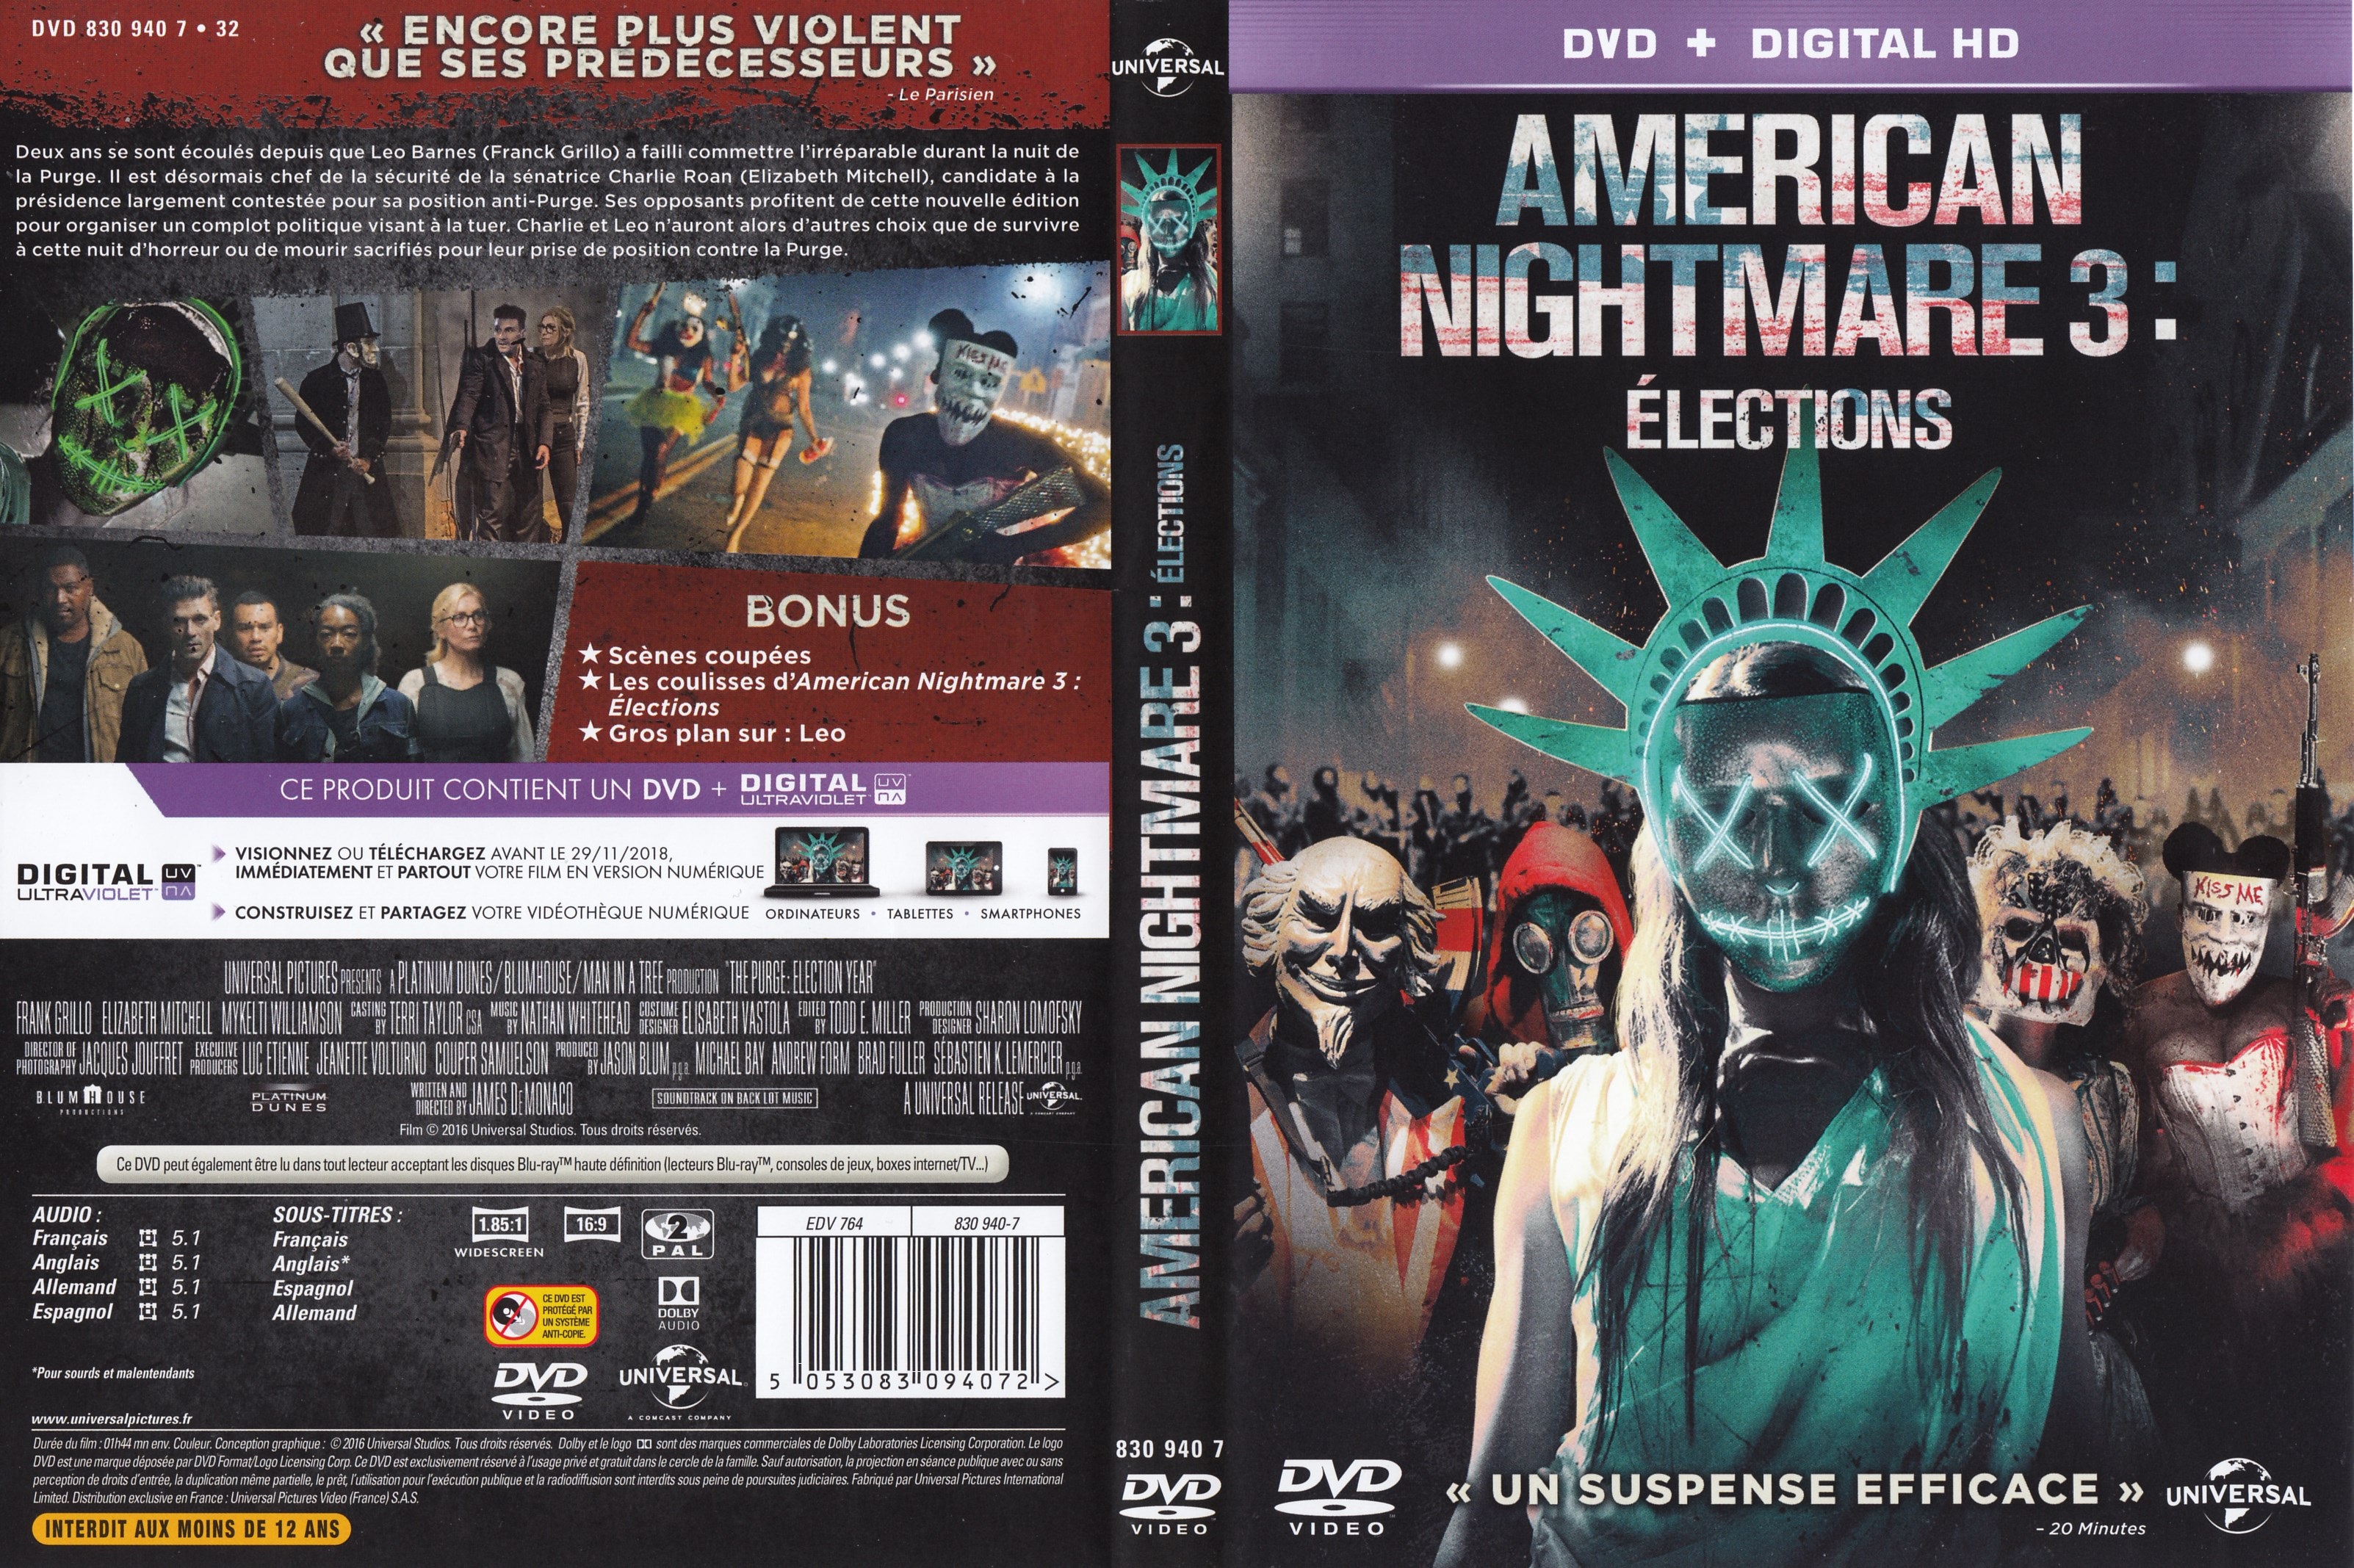 Jaquette DVD American Nightmare 3 : Elections